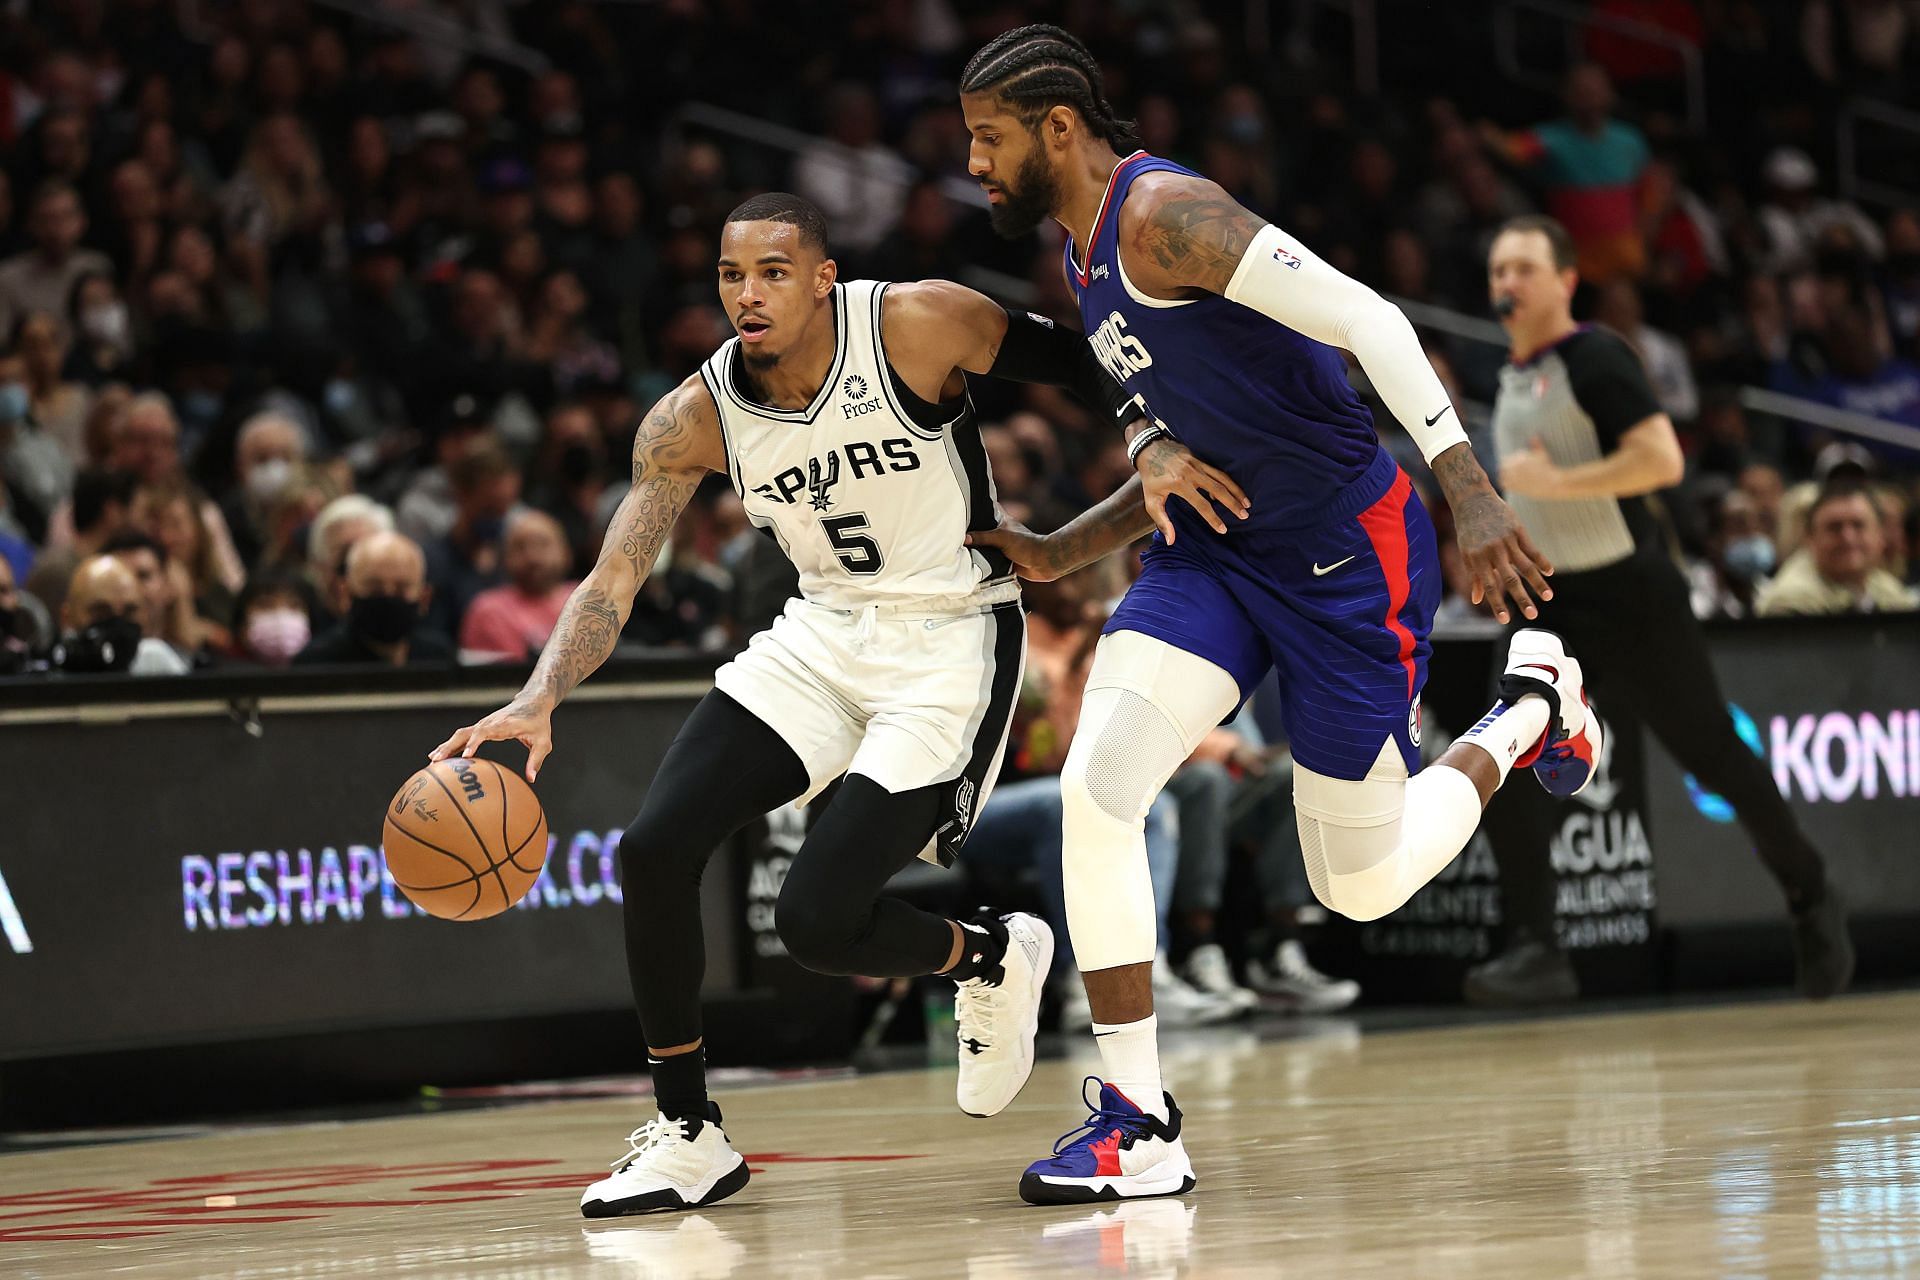 Dejounte Murray of the San Antonio Spurs drives past Paul George of the LA Clippers